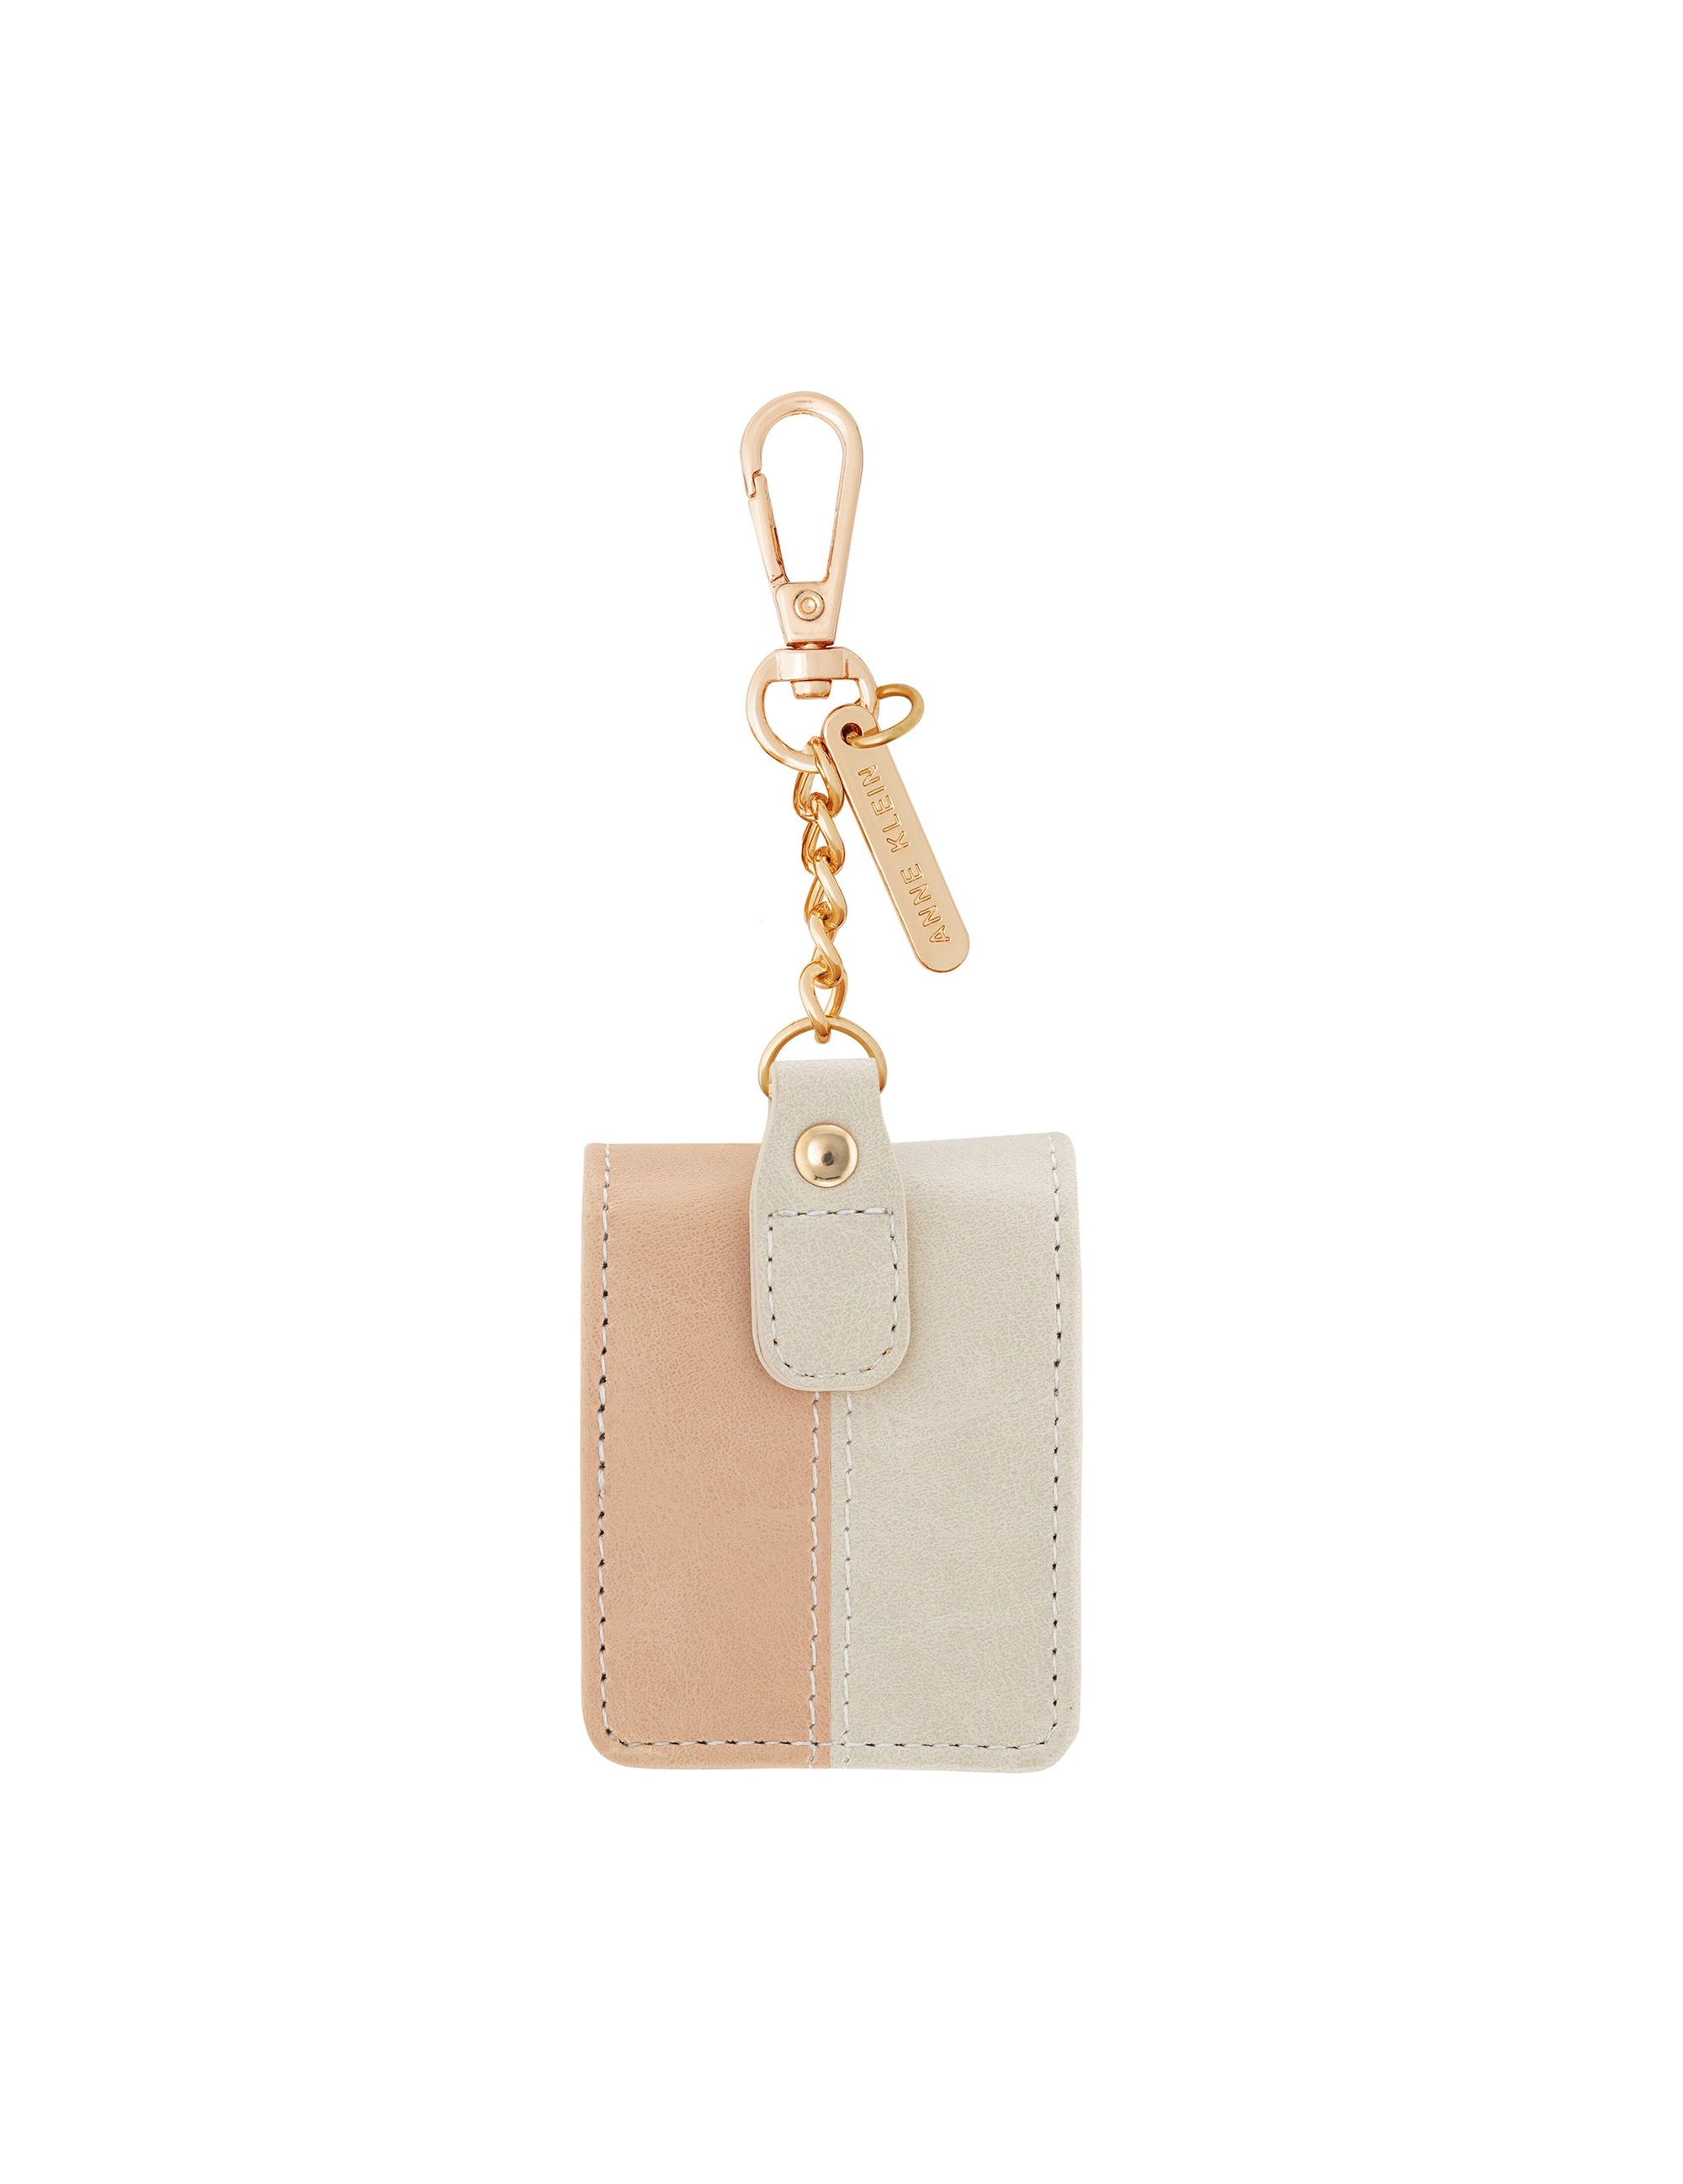 Anne Klein Beige/Blush/Gold-Tone Faux Leather Airpods® Case with Key Chain